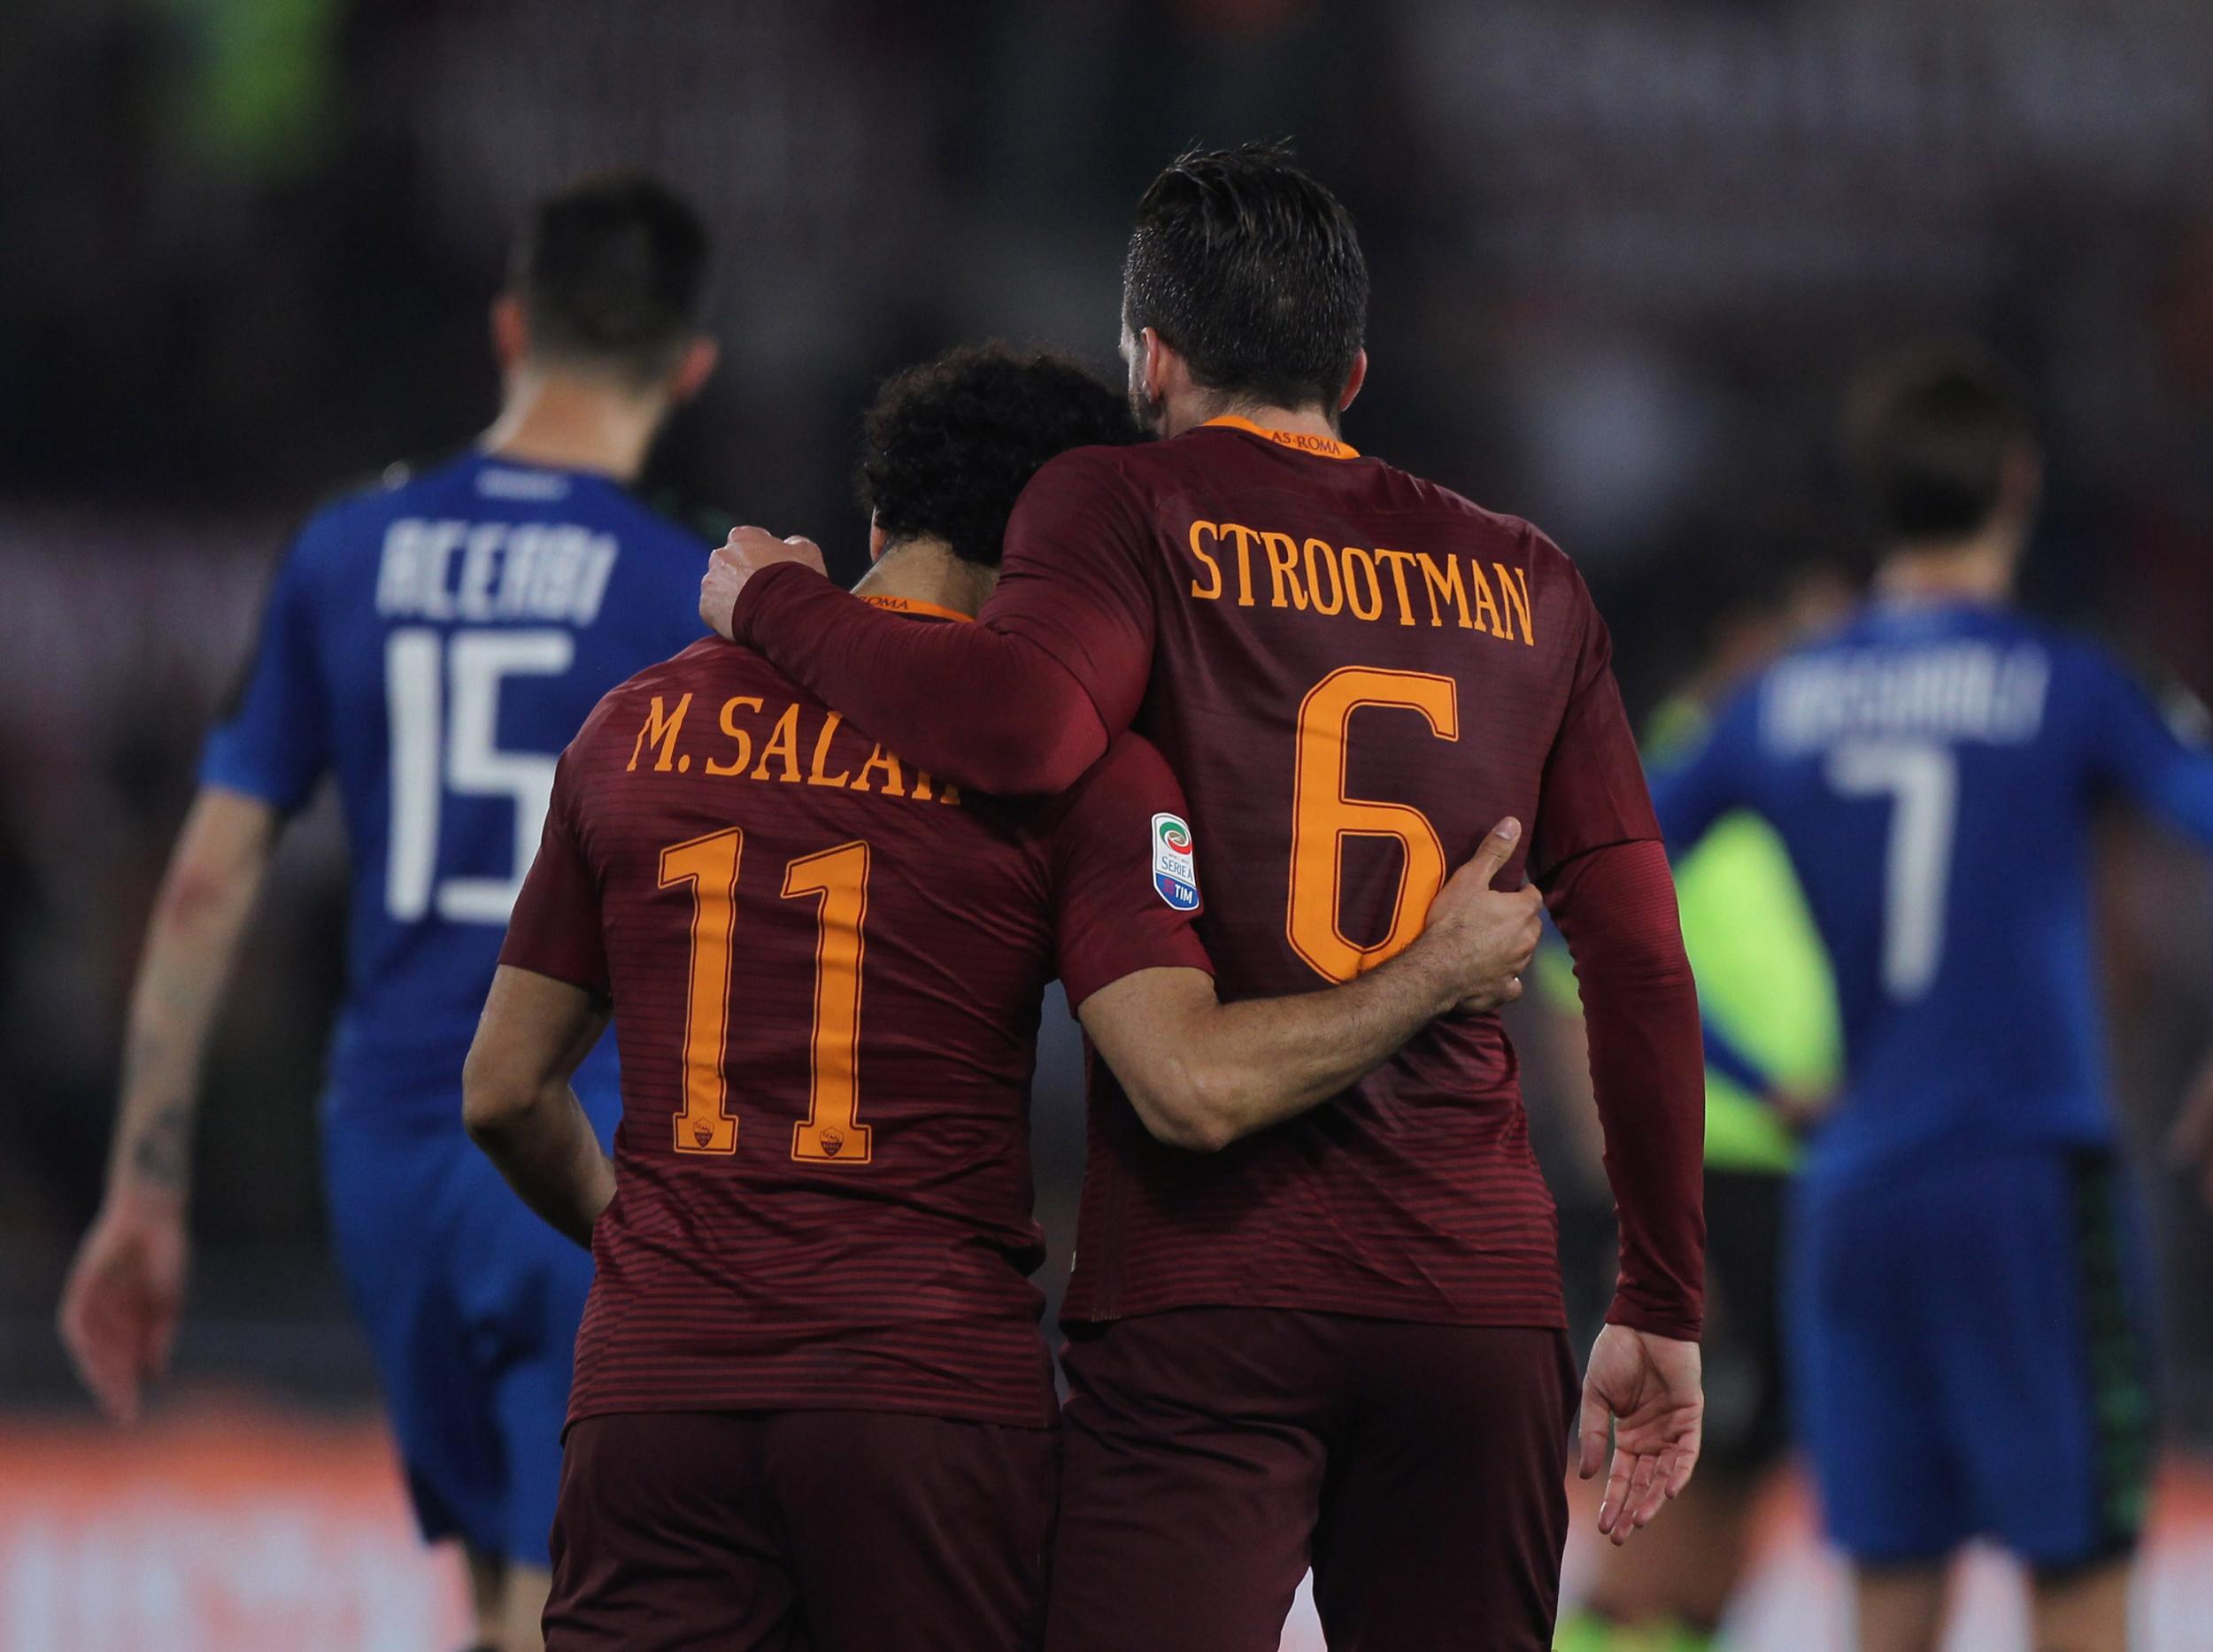 Kevin Strootman reveals Roma&apos;s special plan for dealing with Liverpool&apos;s Mohamed Salah